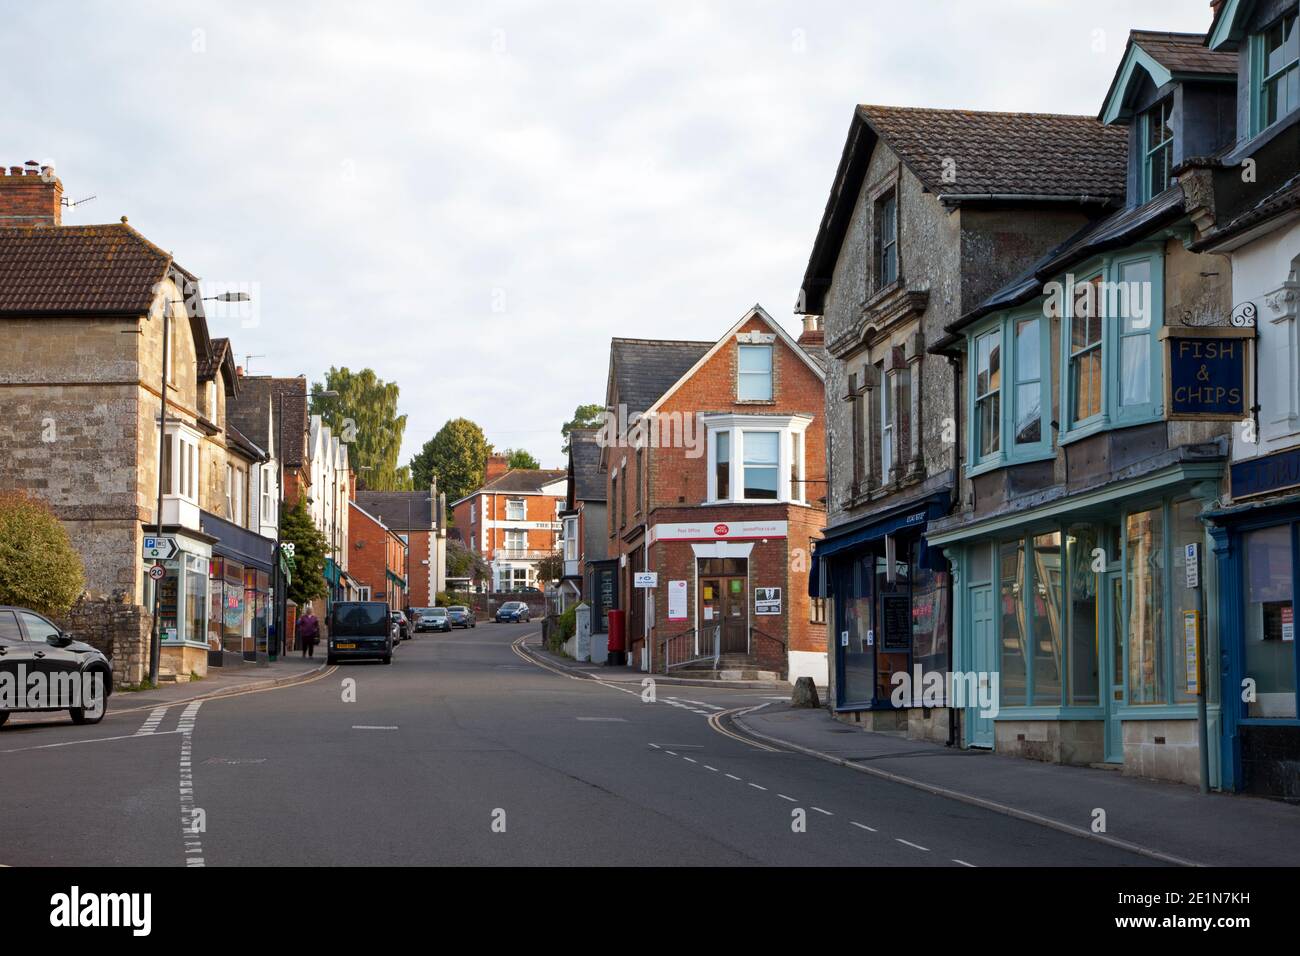 The Market Place and High Street in Tisbury in Wiltshire. Stock Photo